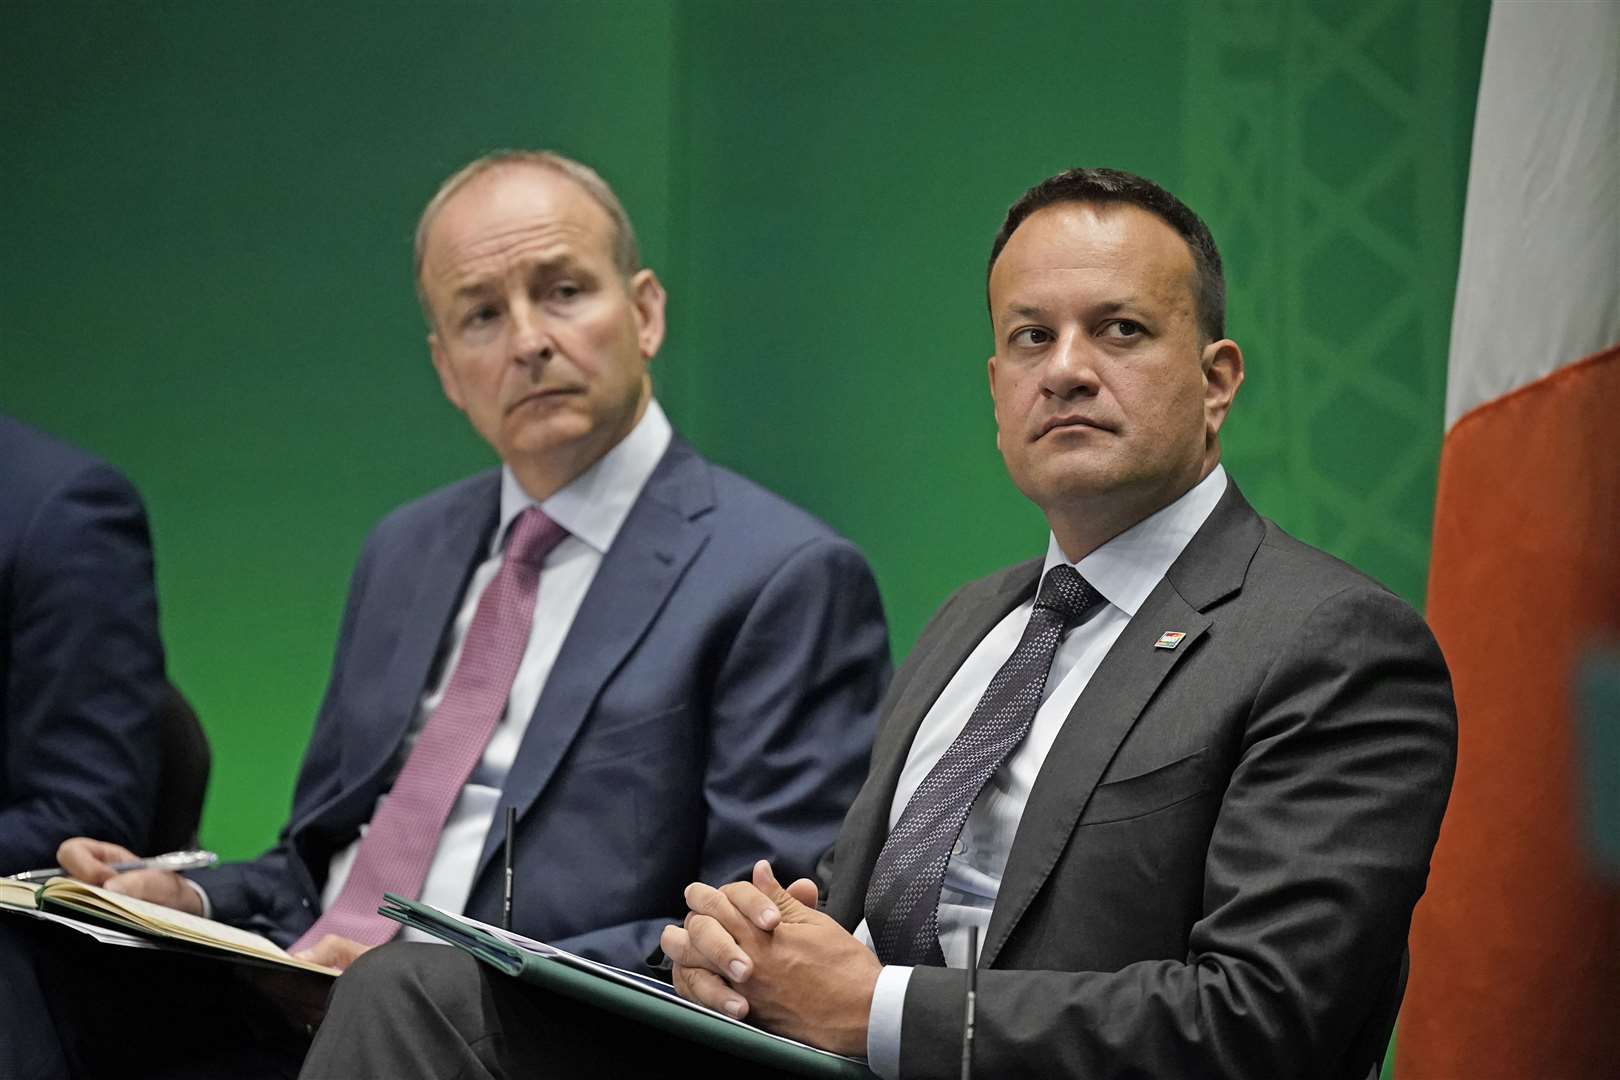 Tanaiste Micheal Martin and Taoiseach Leo Varadkar have been vocal on the need to adhere to international law (PA)